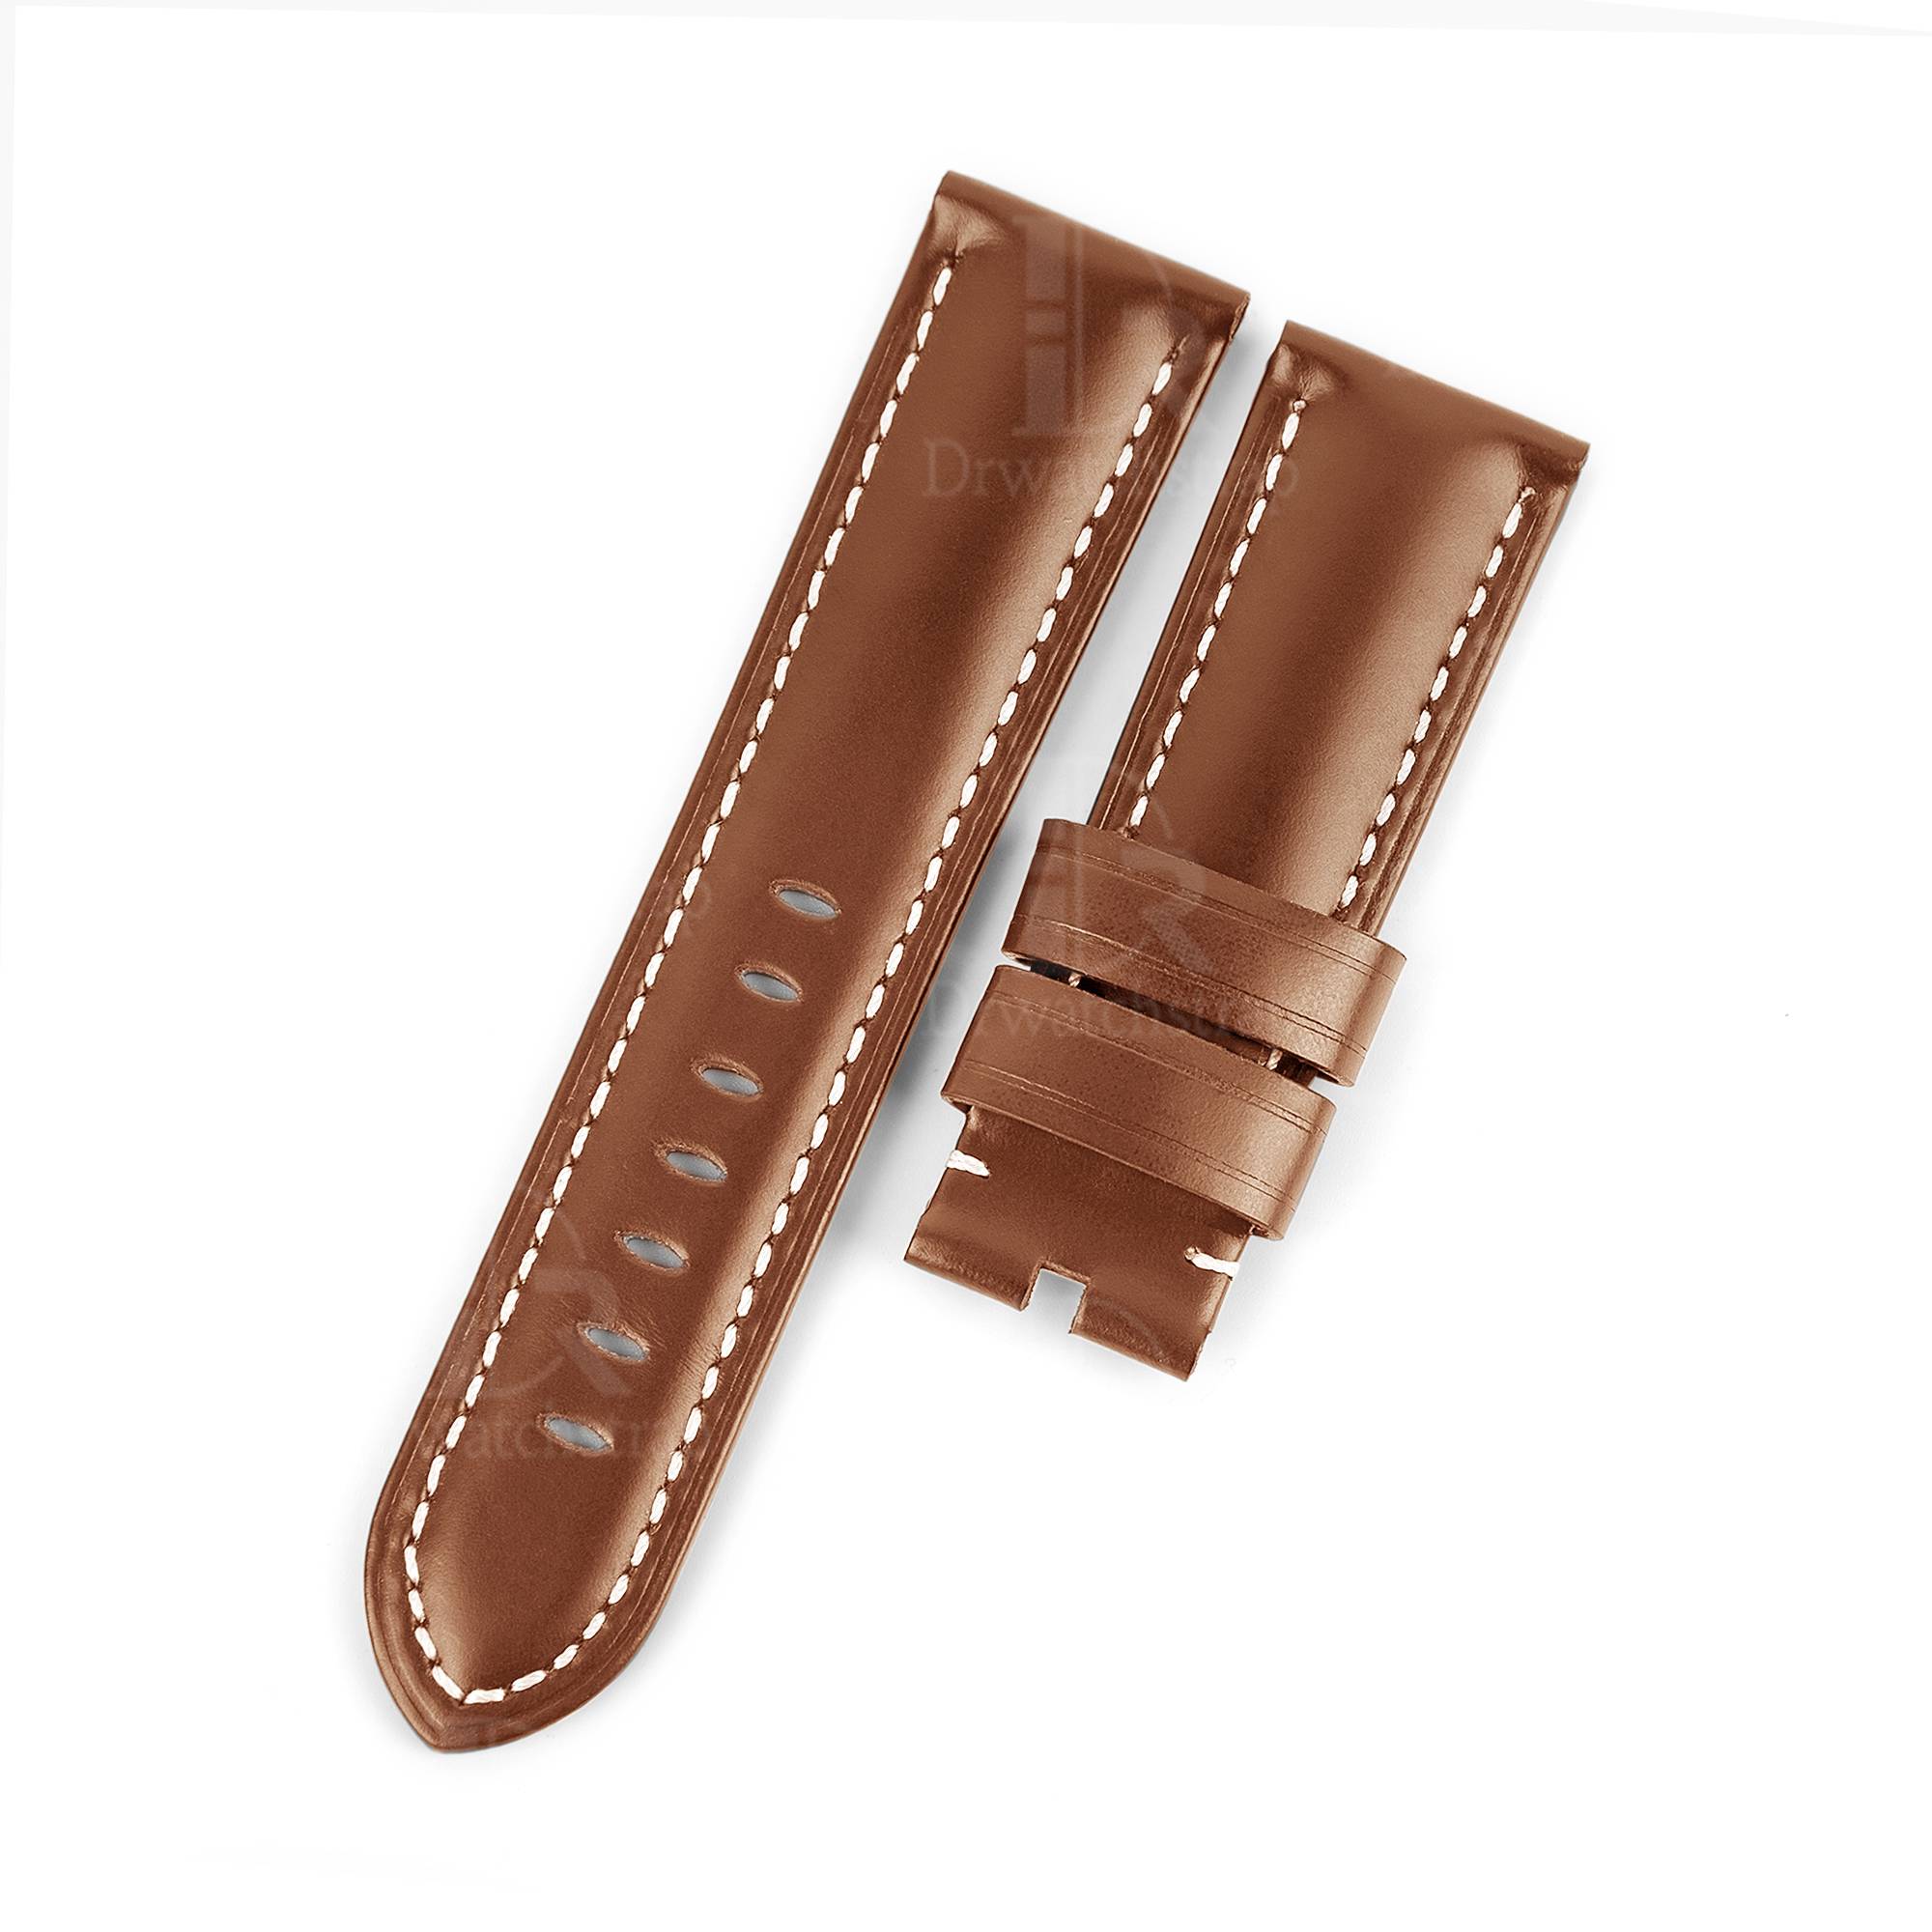 Premium aftermarket best OEM handmade Brown Panerai calfskin leather Strap and watch band replacement 22mm 24mm for Panerai Luminor Due luxury watches from dr watchstrap for sale - Shop the premium calf leather material wholesale straps and watchbands online at a low price